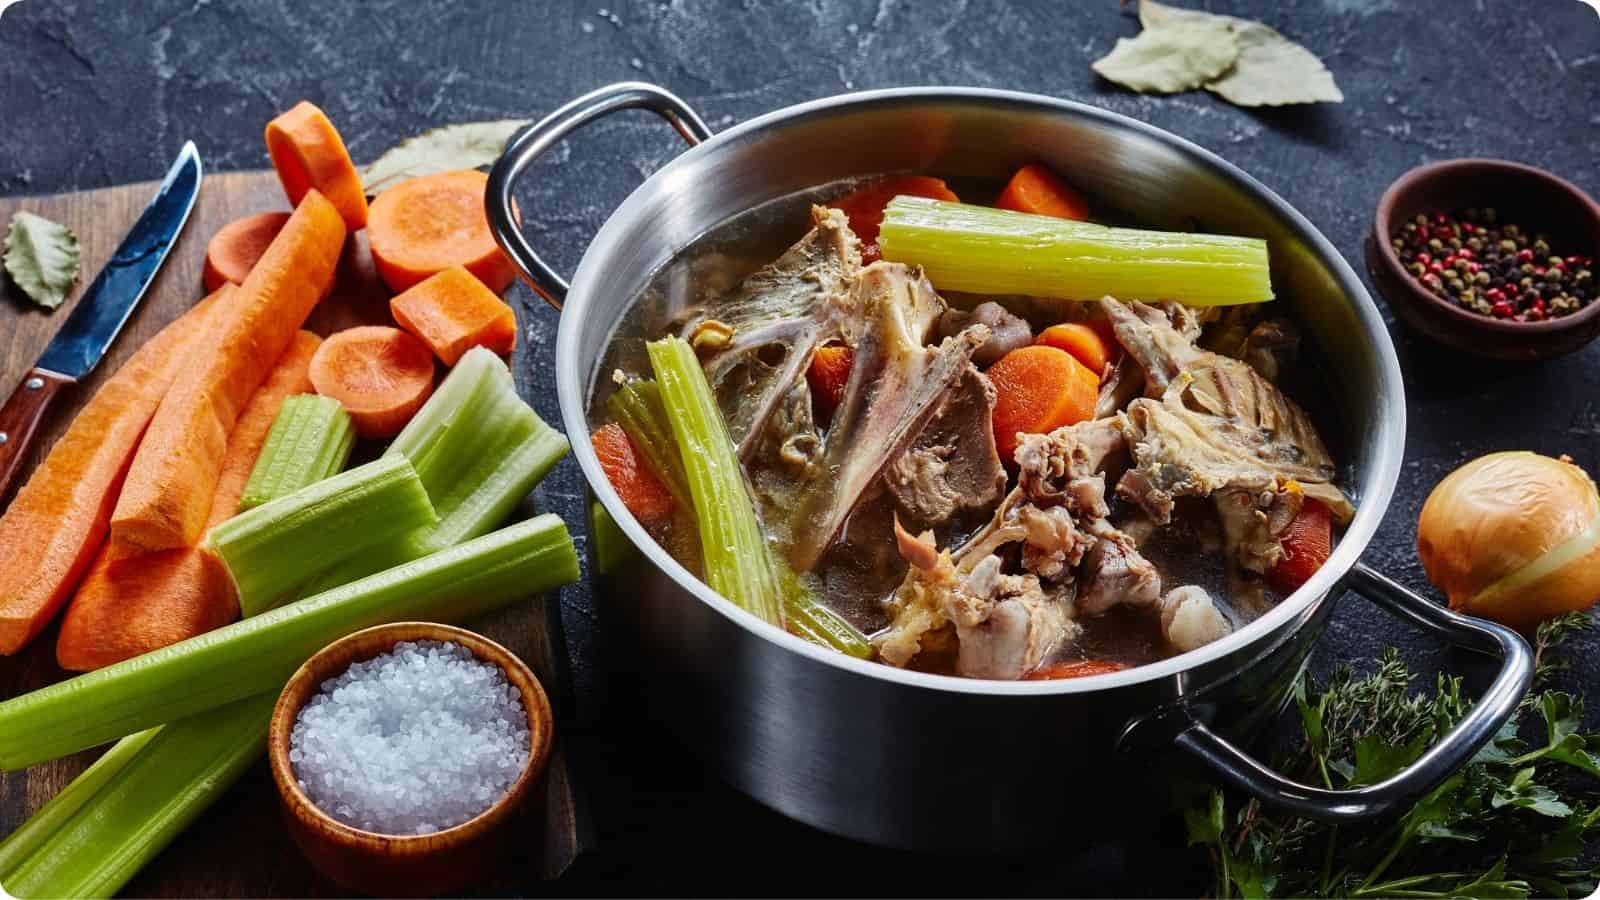 Cooked chicken stock surrounded by slices of carrots, onion, and sprigs of celery, placed on a charcoal-colored countertop.⁣
⁣⁣⁣⁣⁣⁣⁣